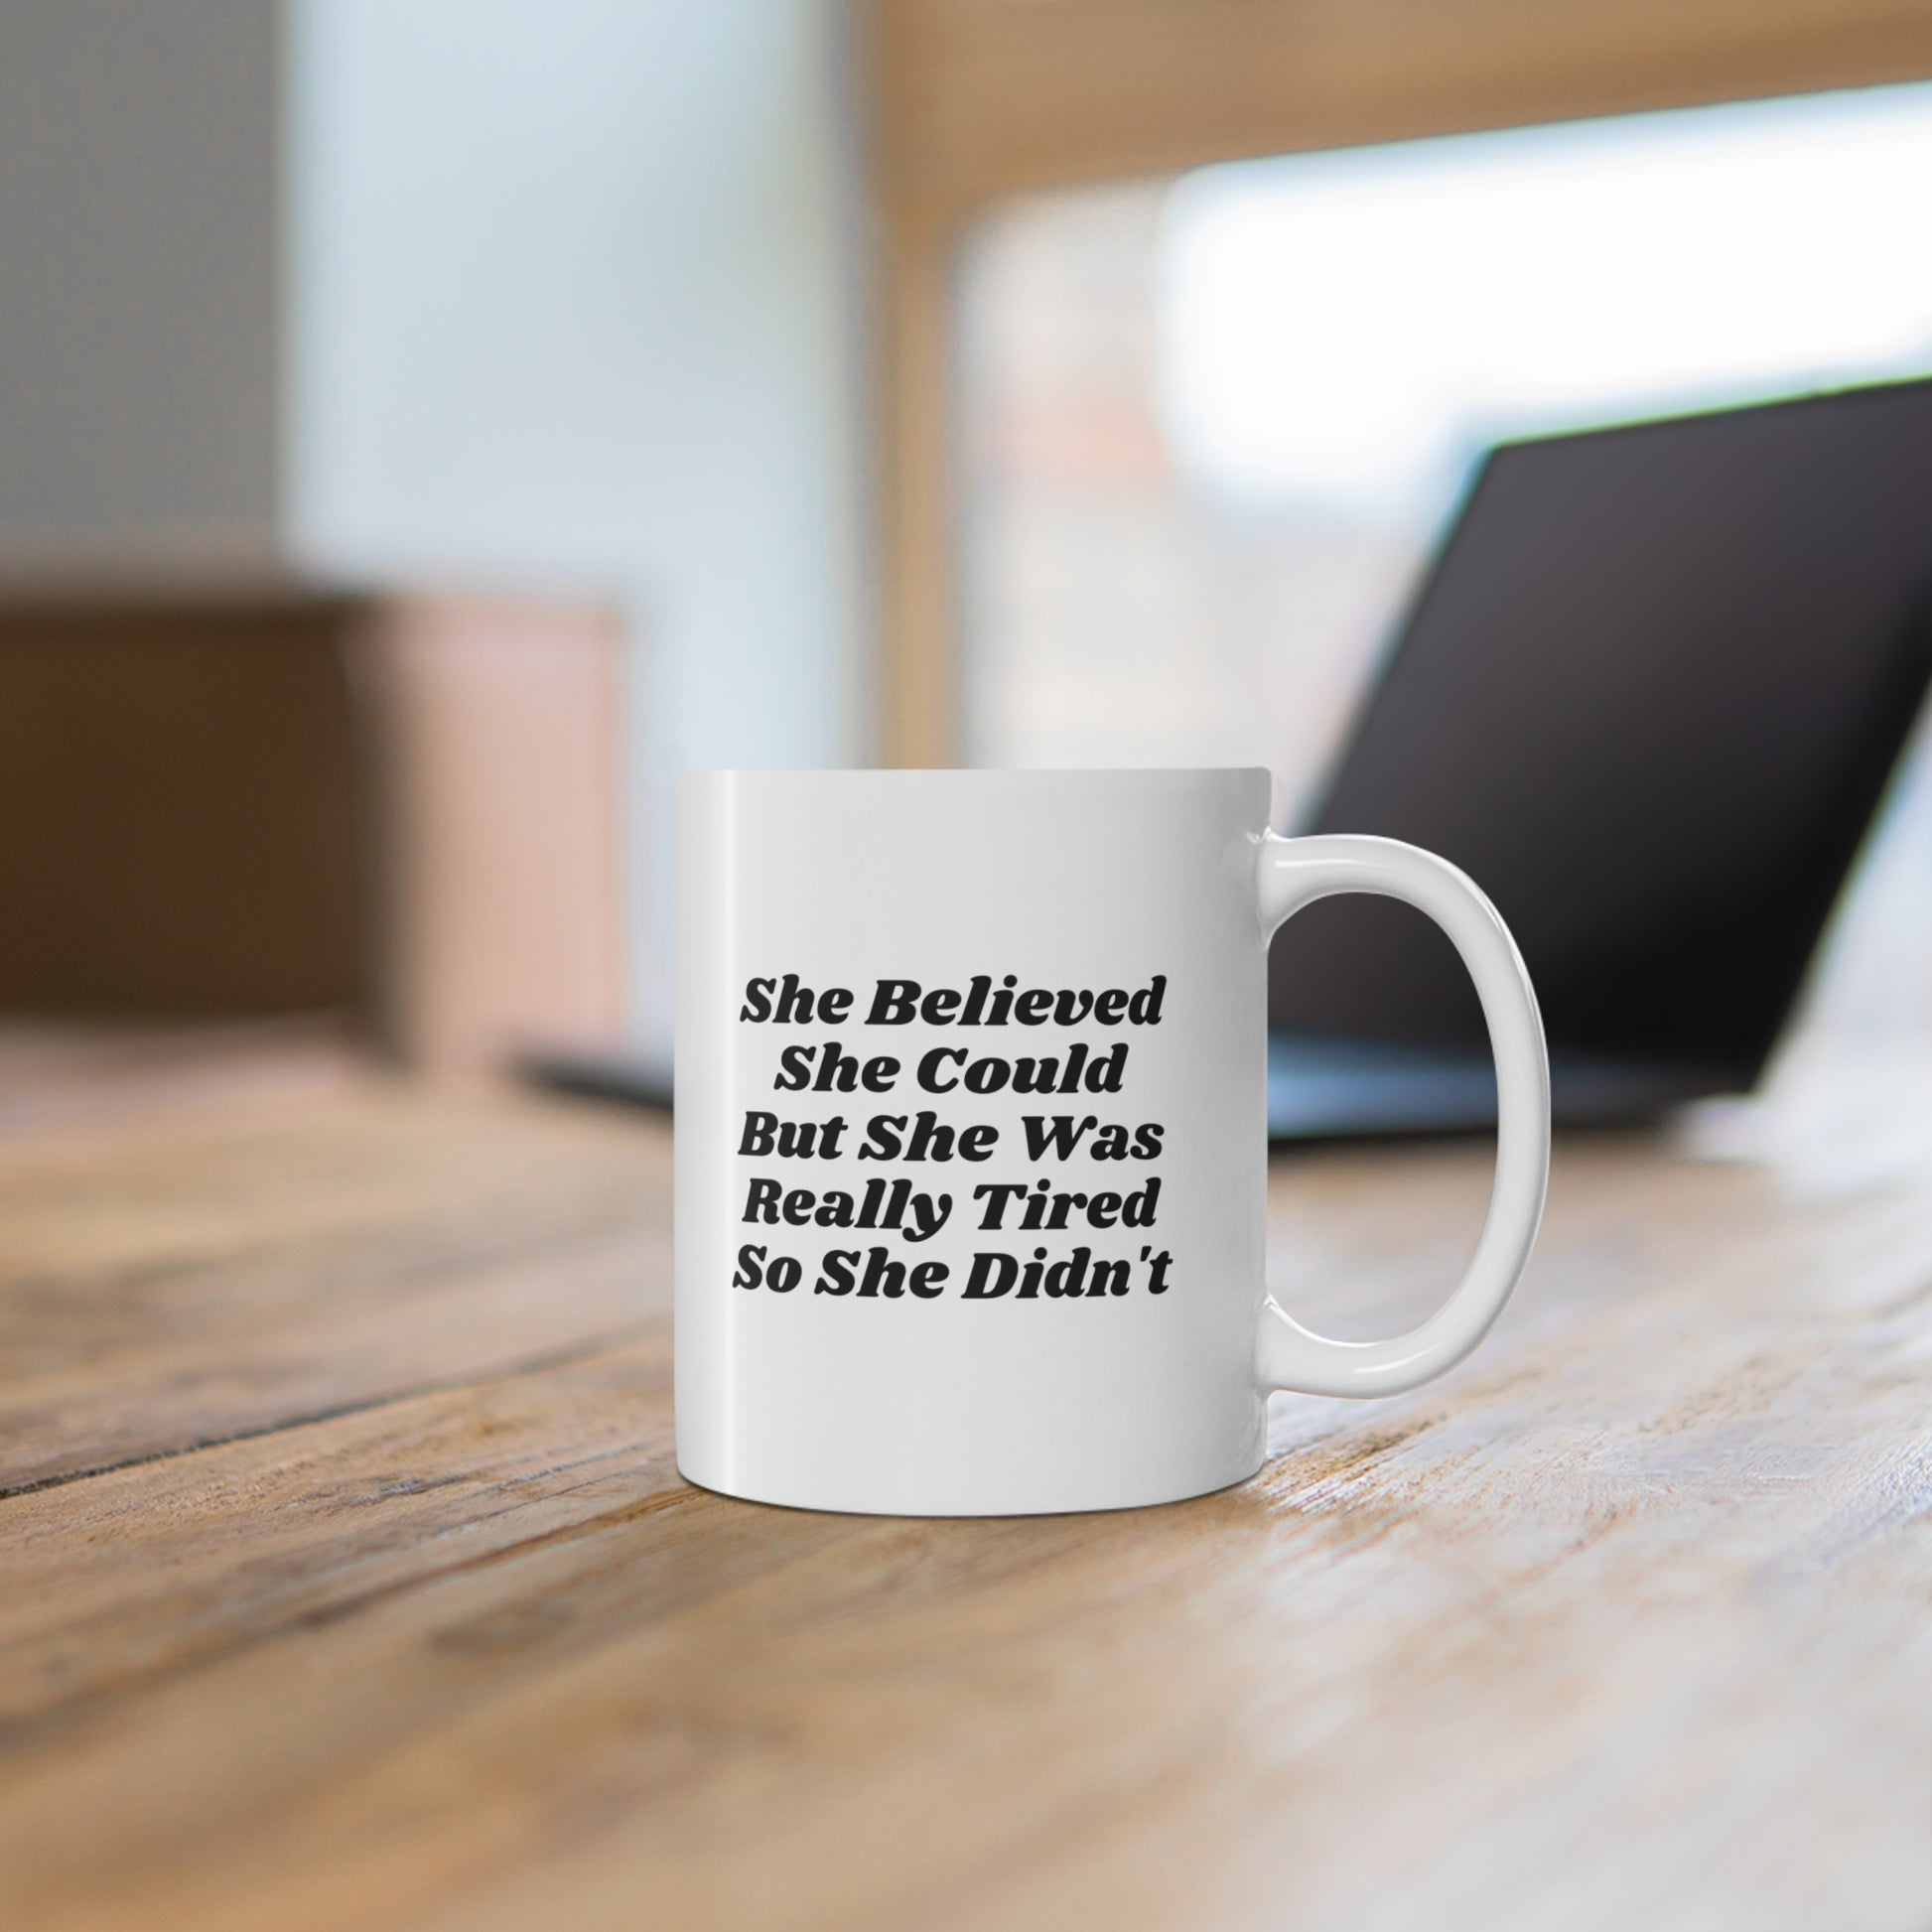 11oz ceramic mug with quote She Believed She Could but she was really tired So She Didn't